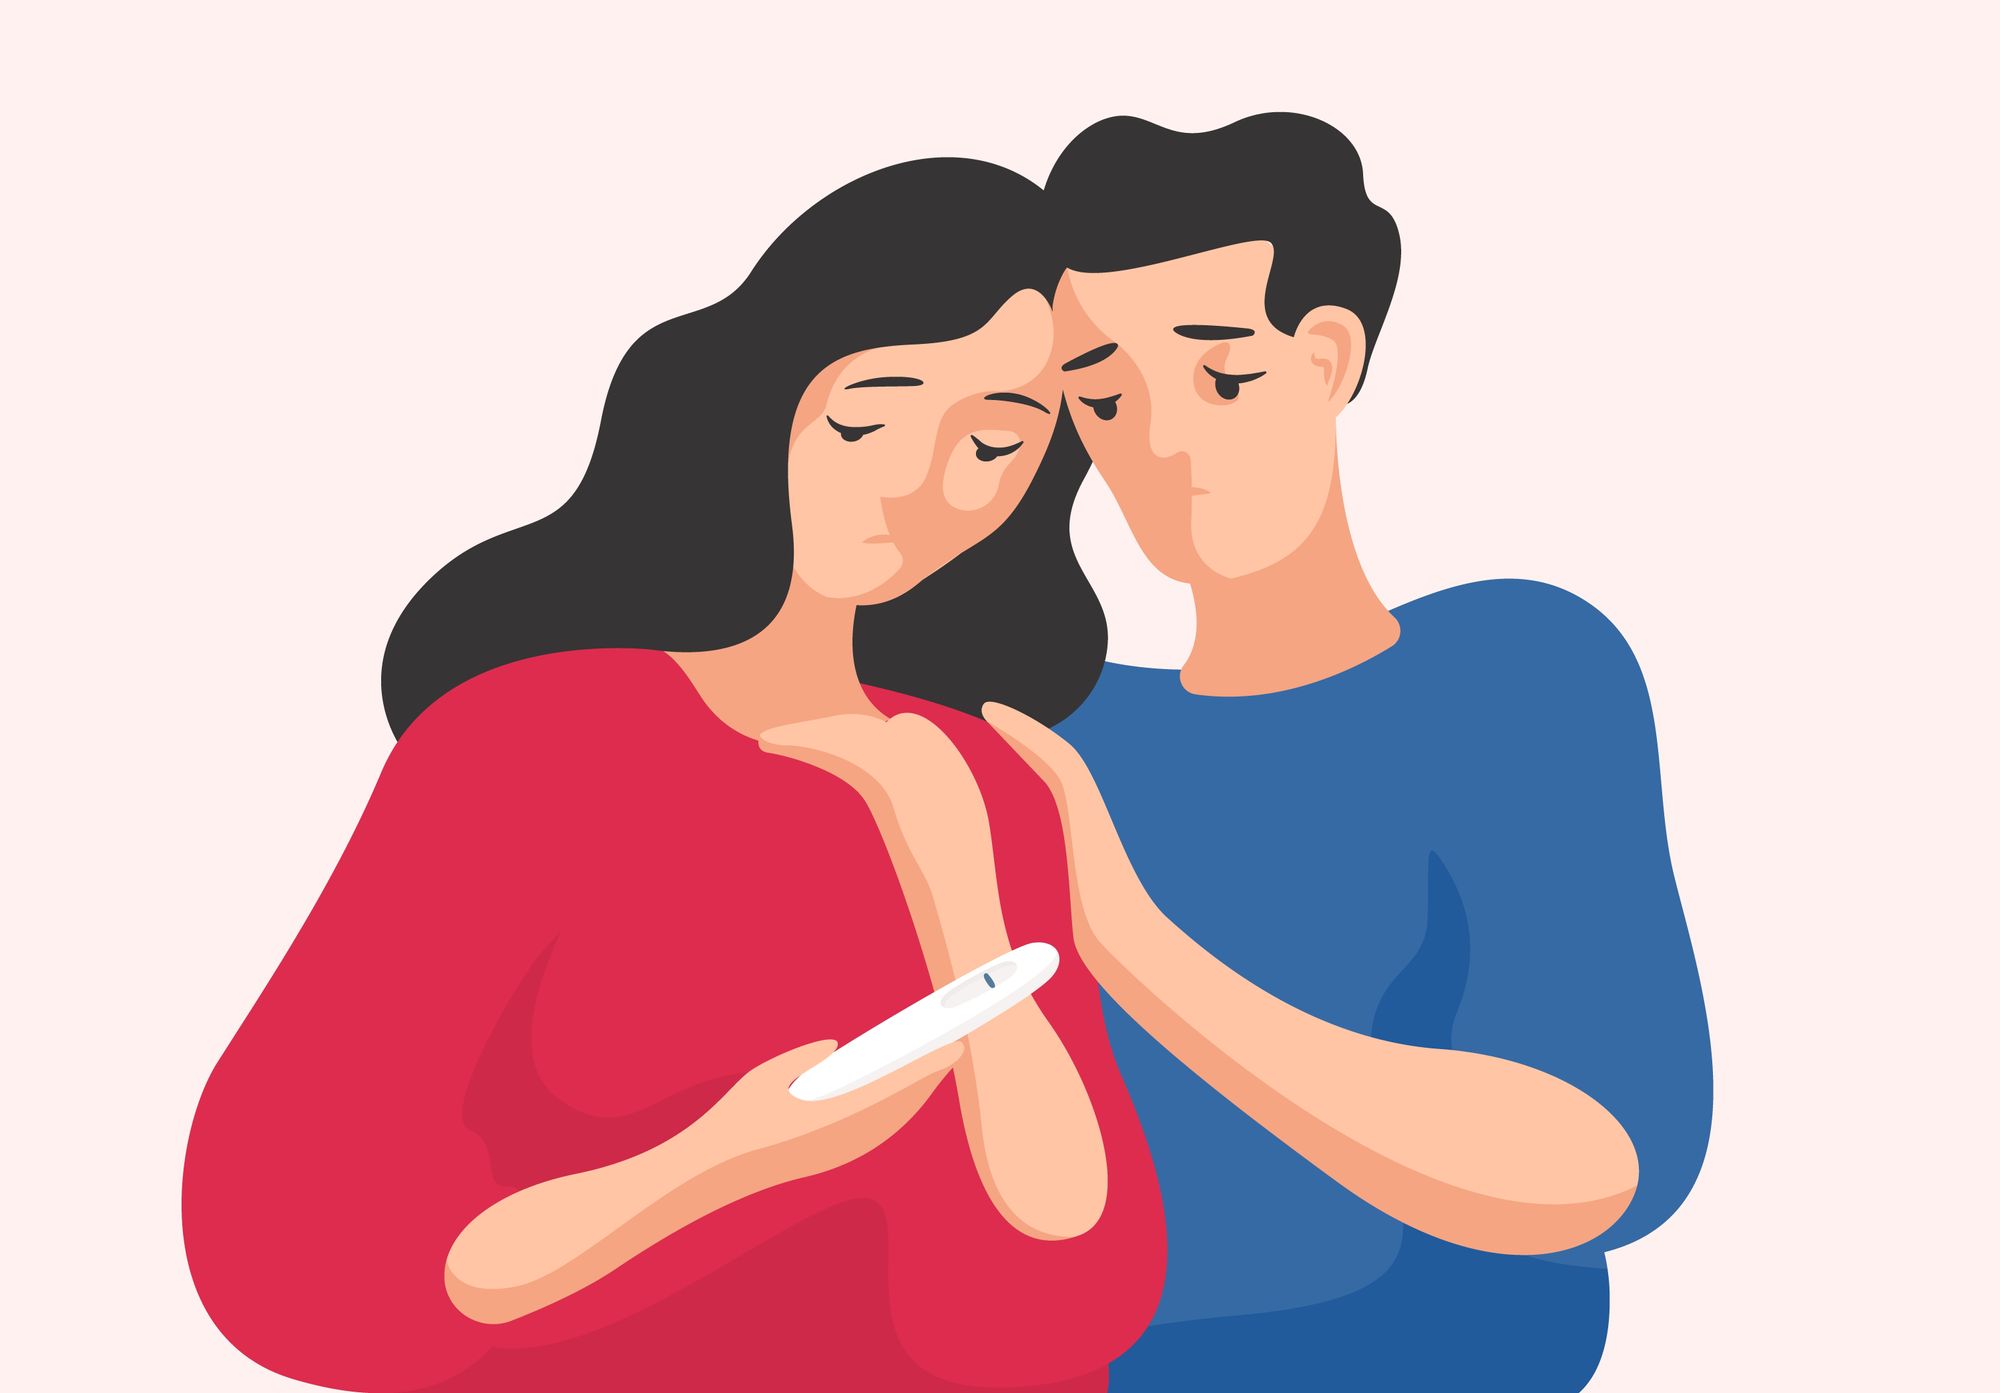 Couple holding a pregnancy test By GoodStudio | www.shutterstock.com